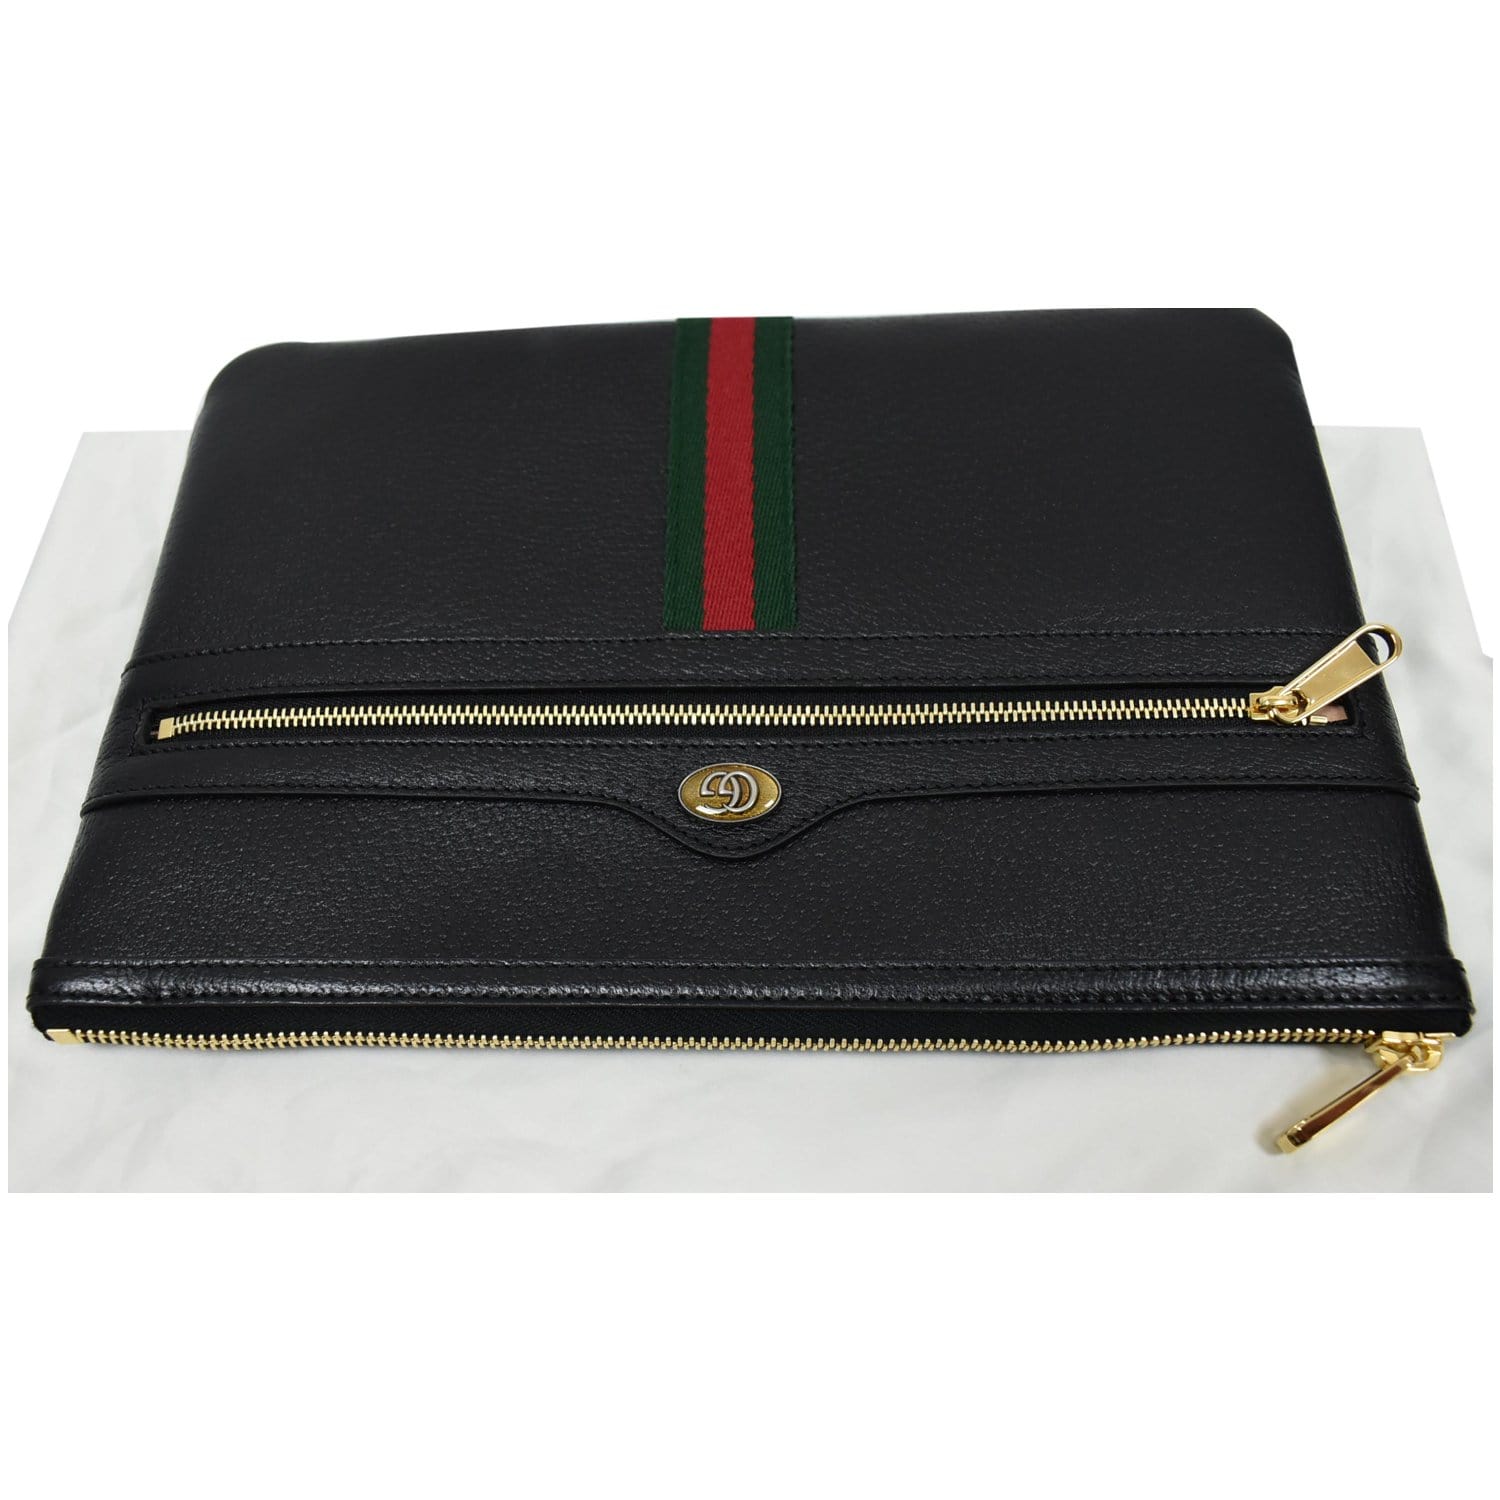 Pouch leather clutch bag